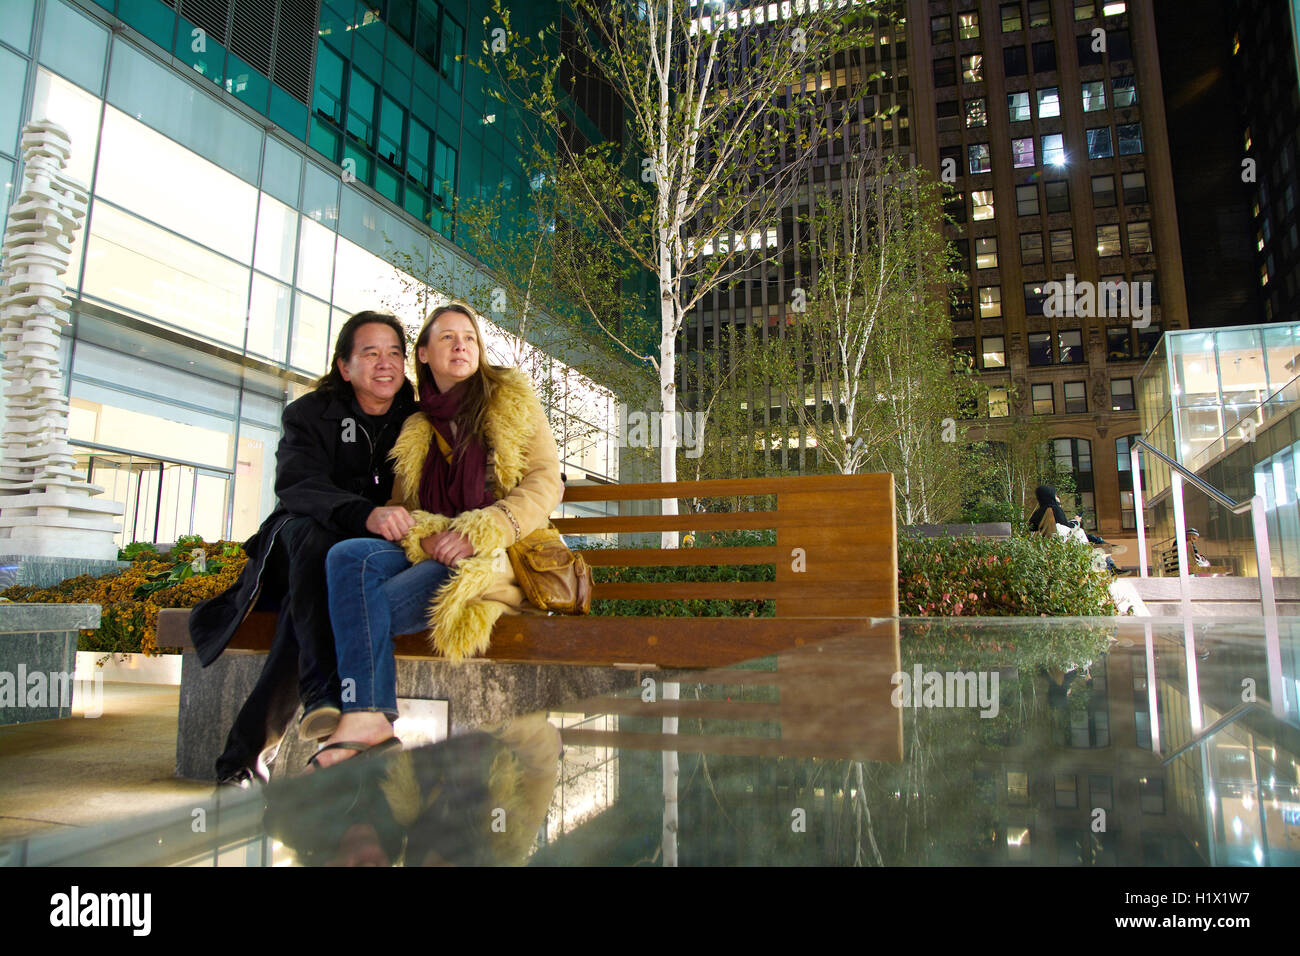 - bench Manhattan images and Alamy photography stock hi-res